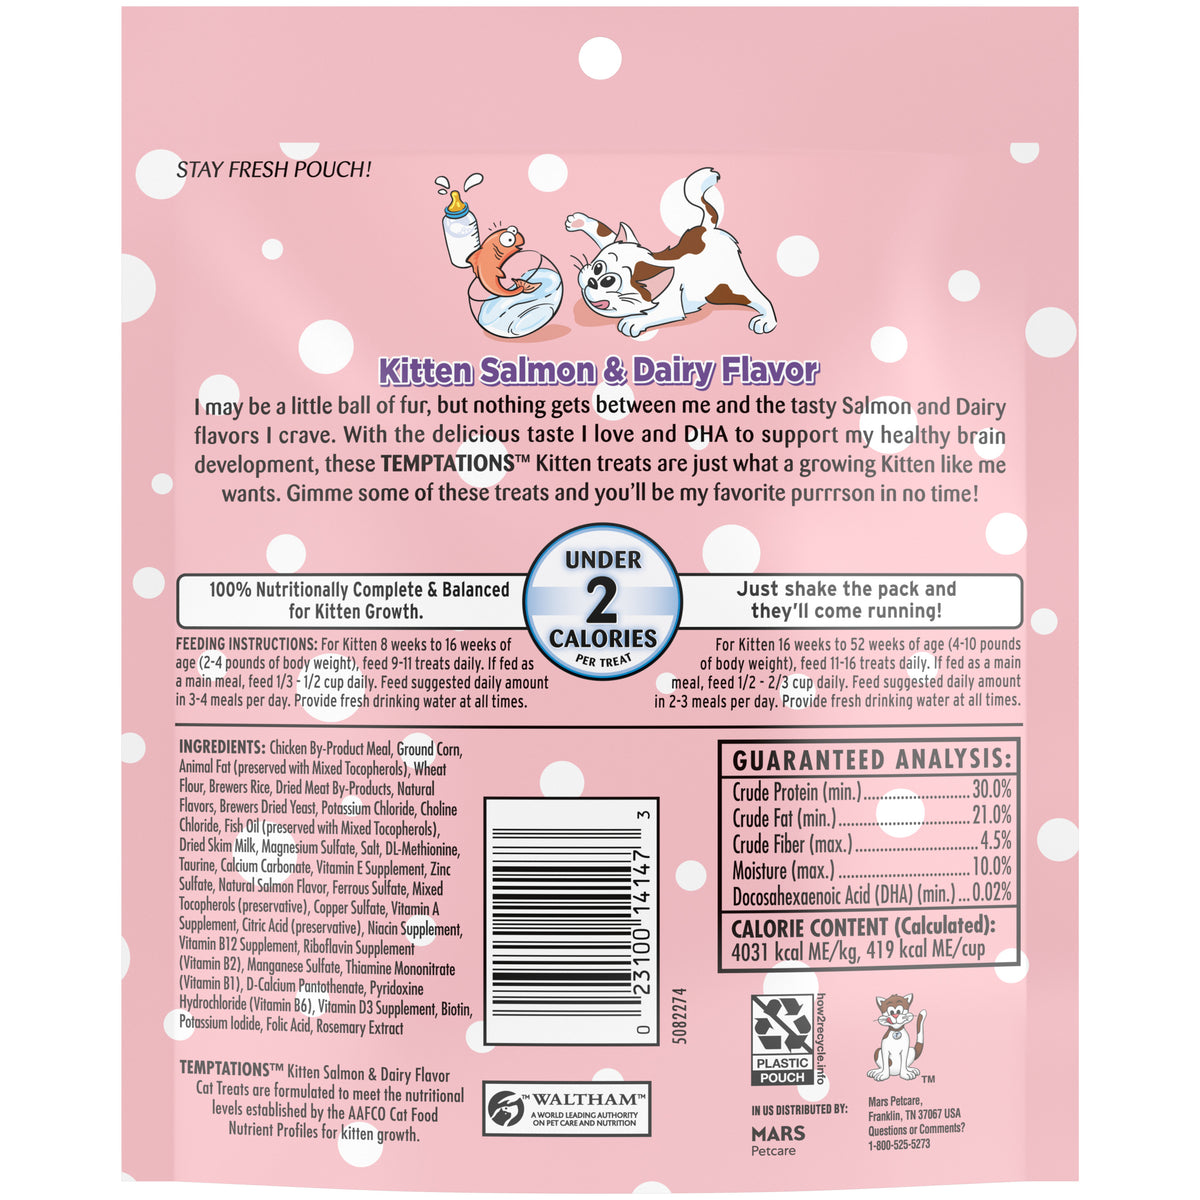 [Temptations][BUNDLE TEMPTATIONS Crunchy and Soft Kitten Treats, Salmon and Dairy Flavor, 6.3 oz. Pouch][Back Image]